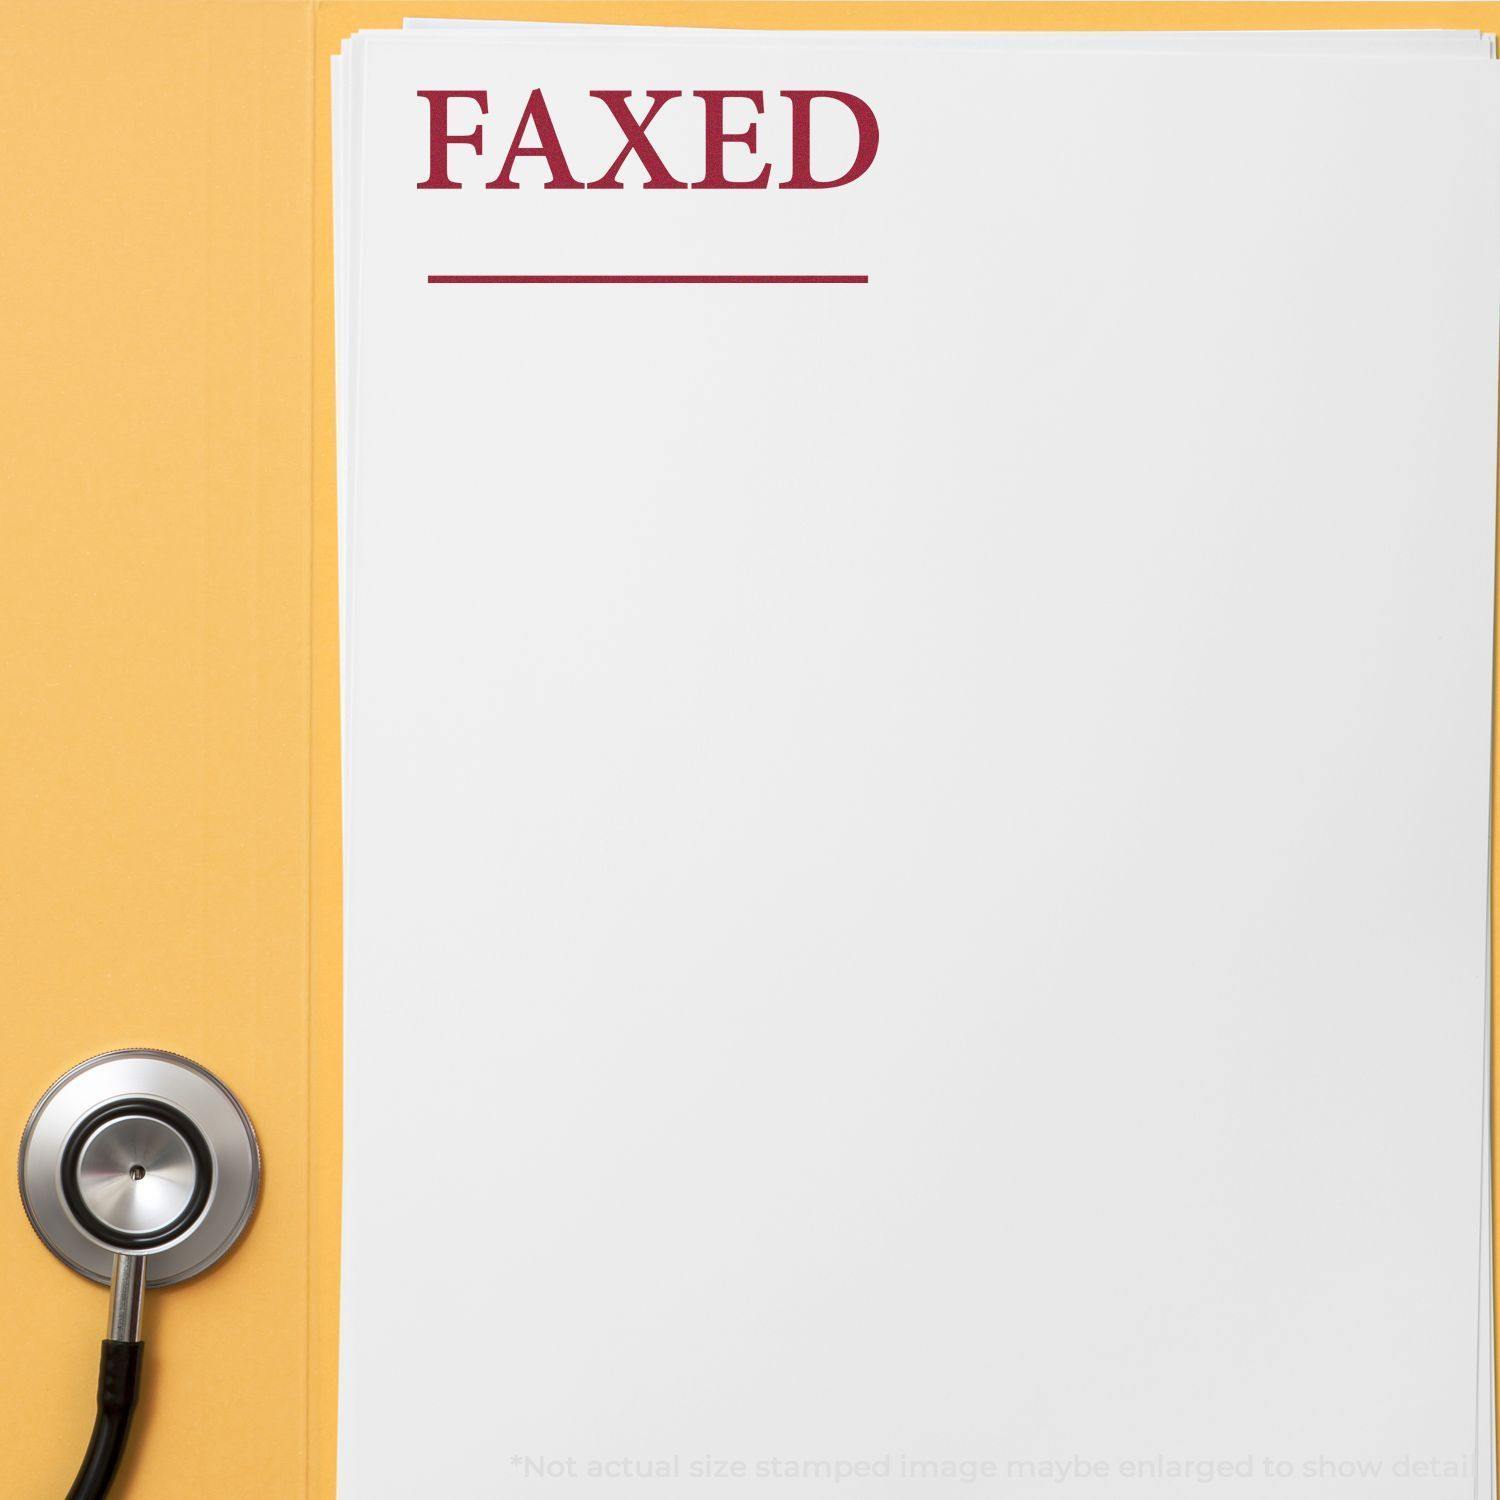 A stock office rubber stamp with a stamped image showing how the text "FAXED" in a large times font with a line underneath the text is displayed after stamping.